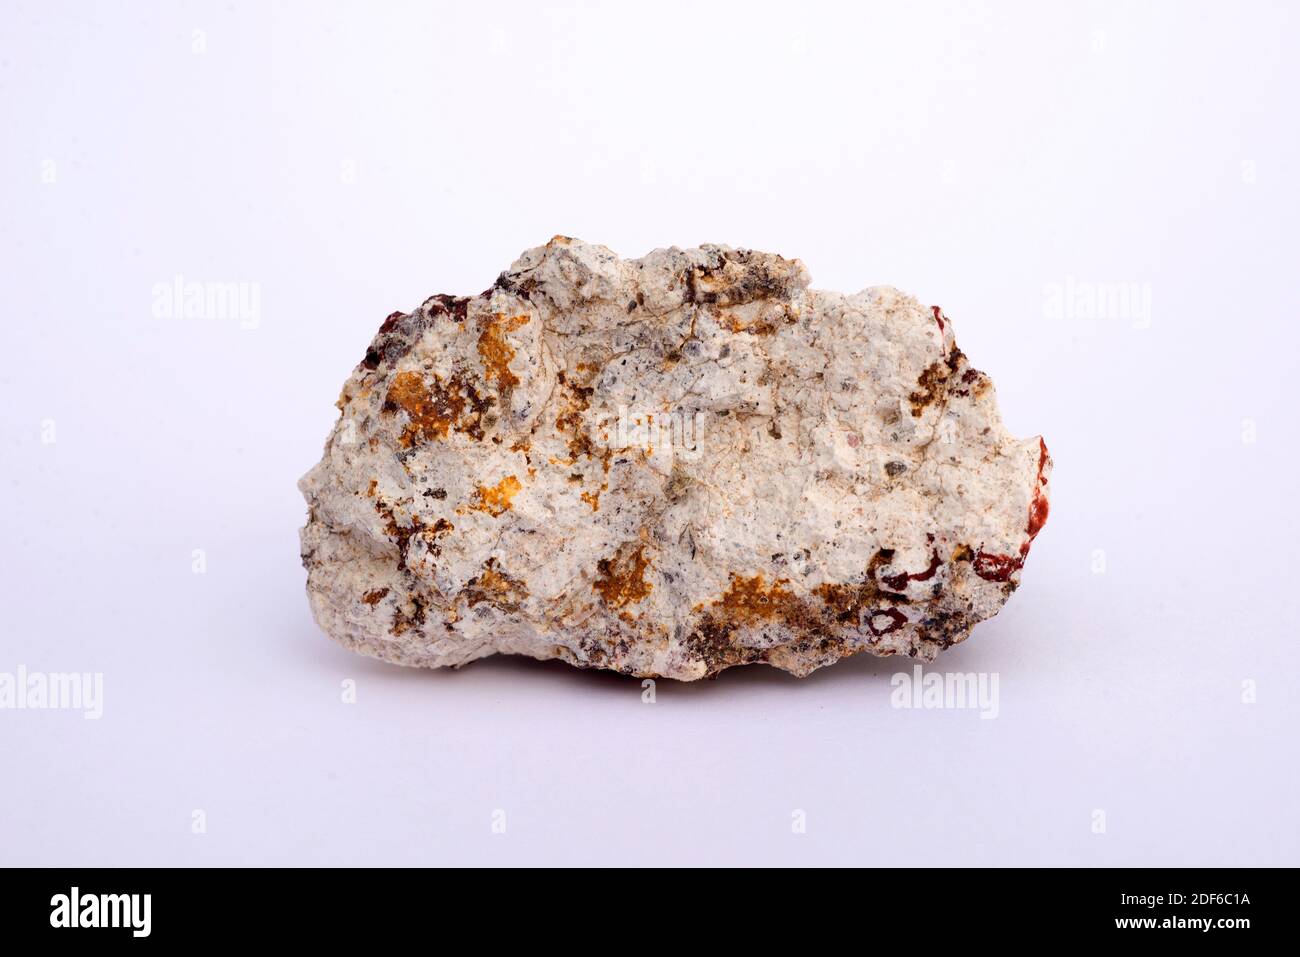 Ignimbrite is a volcanic rock formed from a lithified deposit of pyroclastic flow. This sample comes from Cabo de Gata, Almeria, Andalusia, Spain. Stock Photo